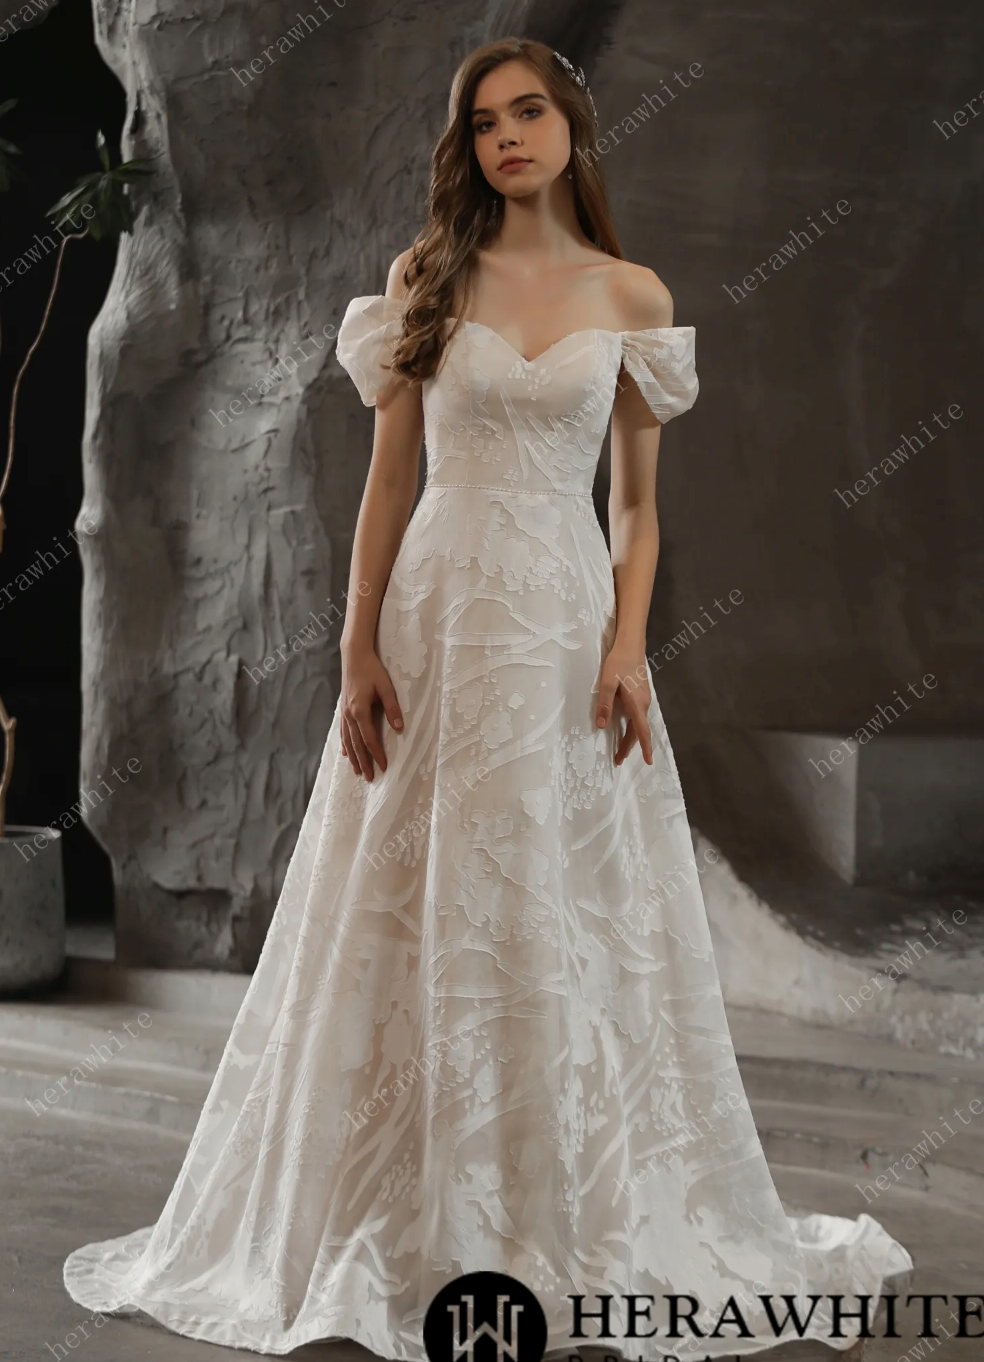 Lace Wedding Dress Styles For Every Bride | The Wedding Shoppe